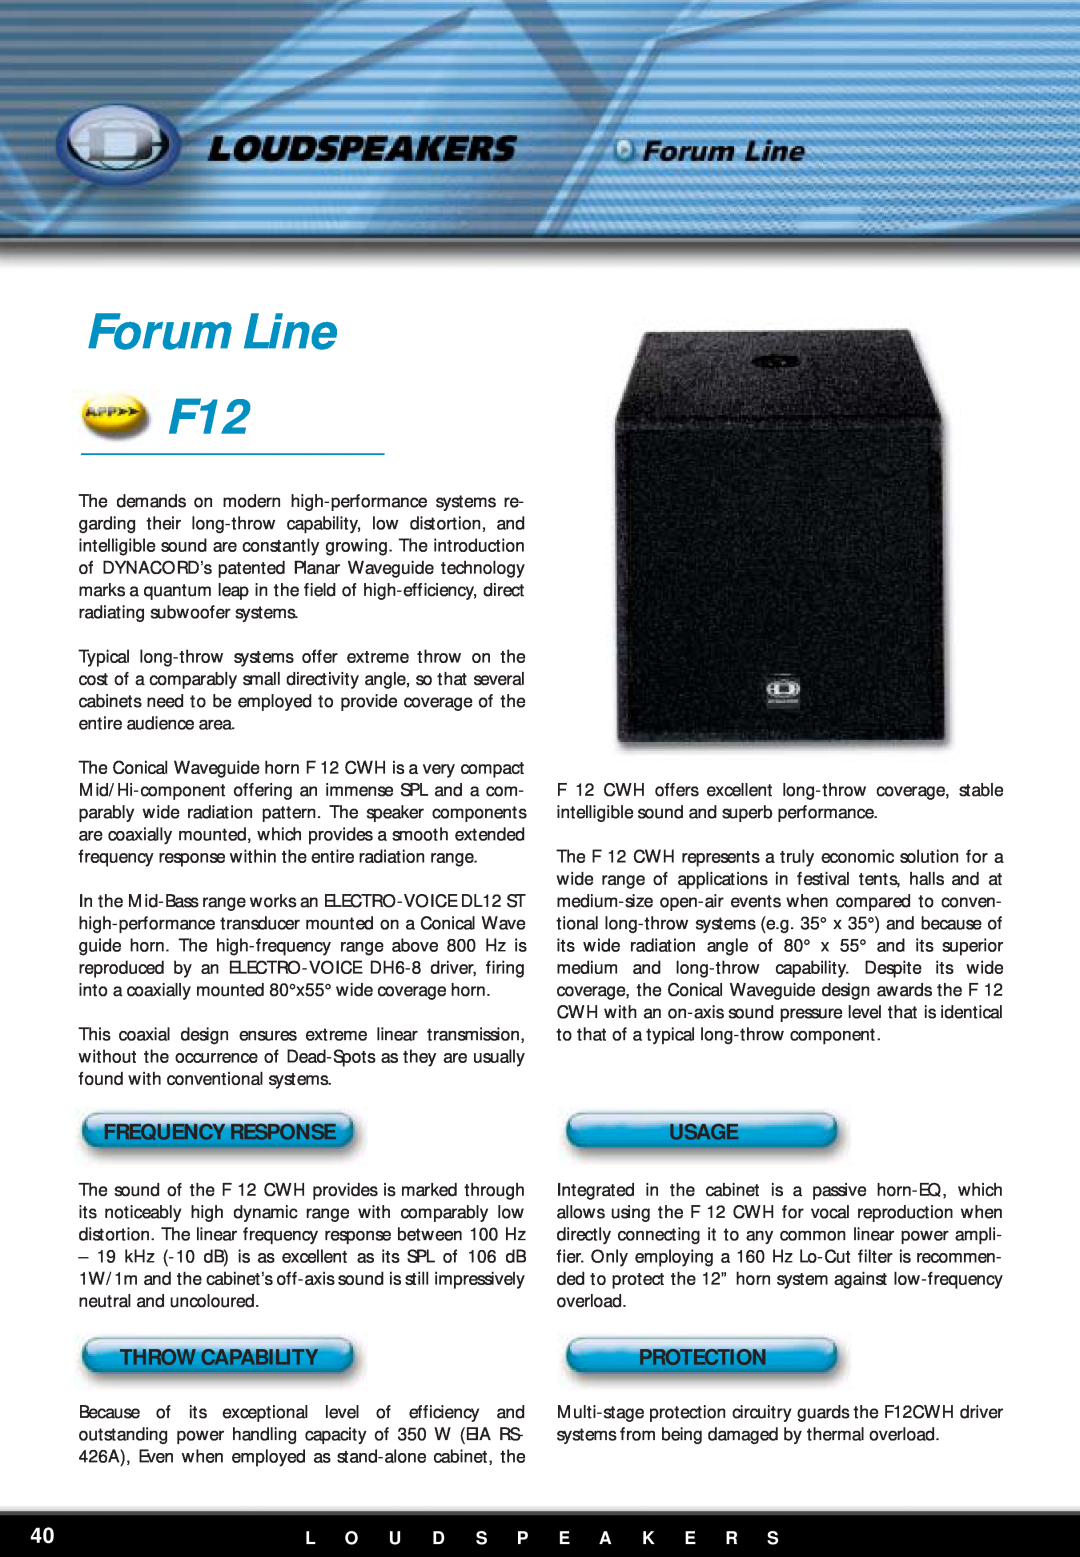 Dynacord manual Forum Line F12, Frequency Response, Throw Capability, L O U D S P E A K E R S, Usage, Protection 